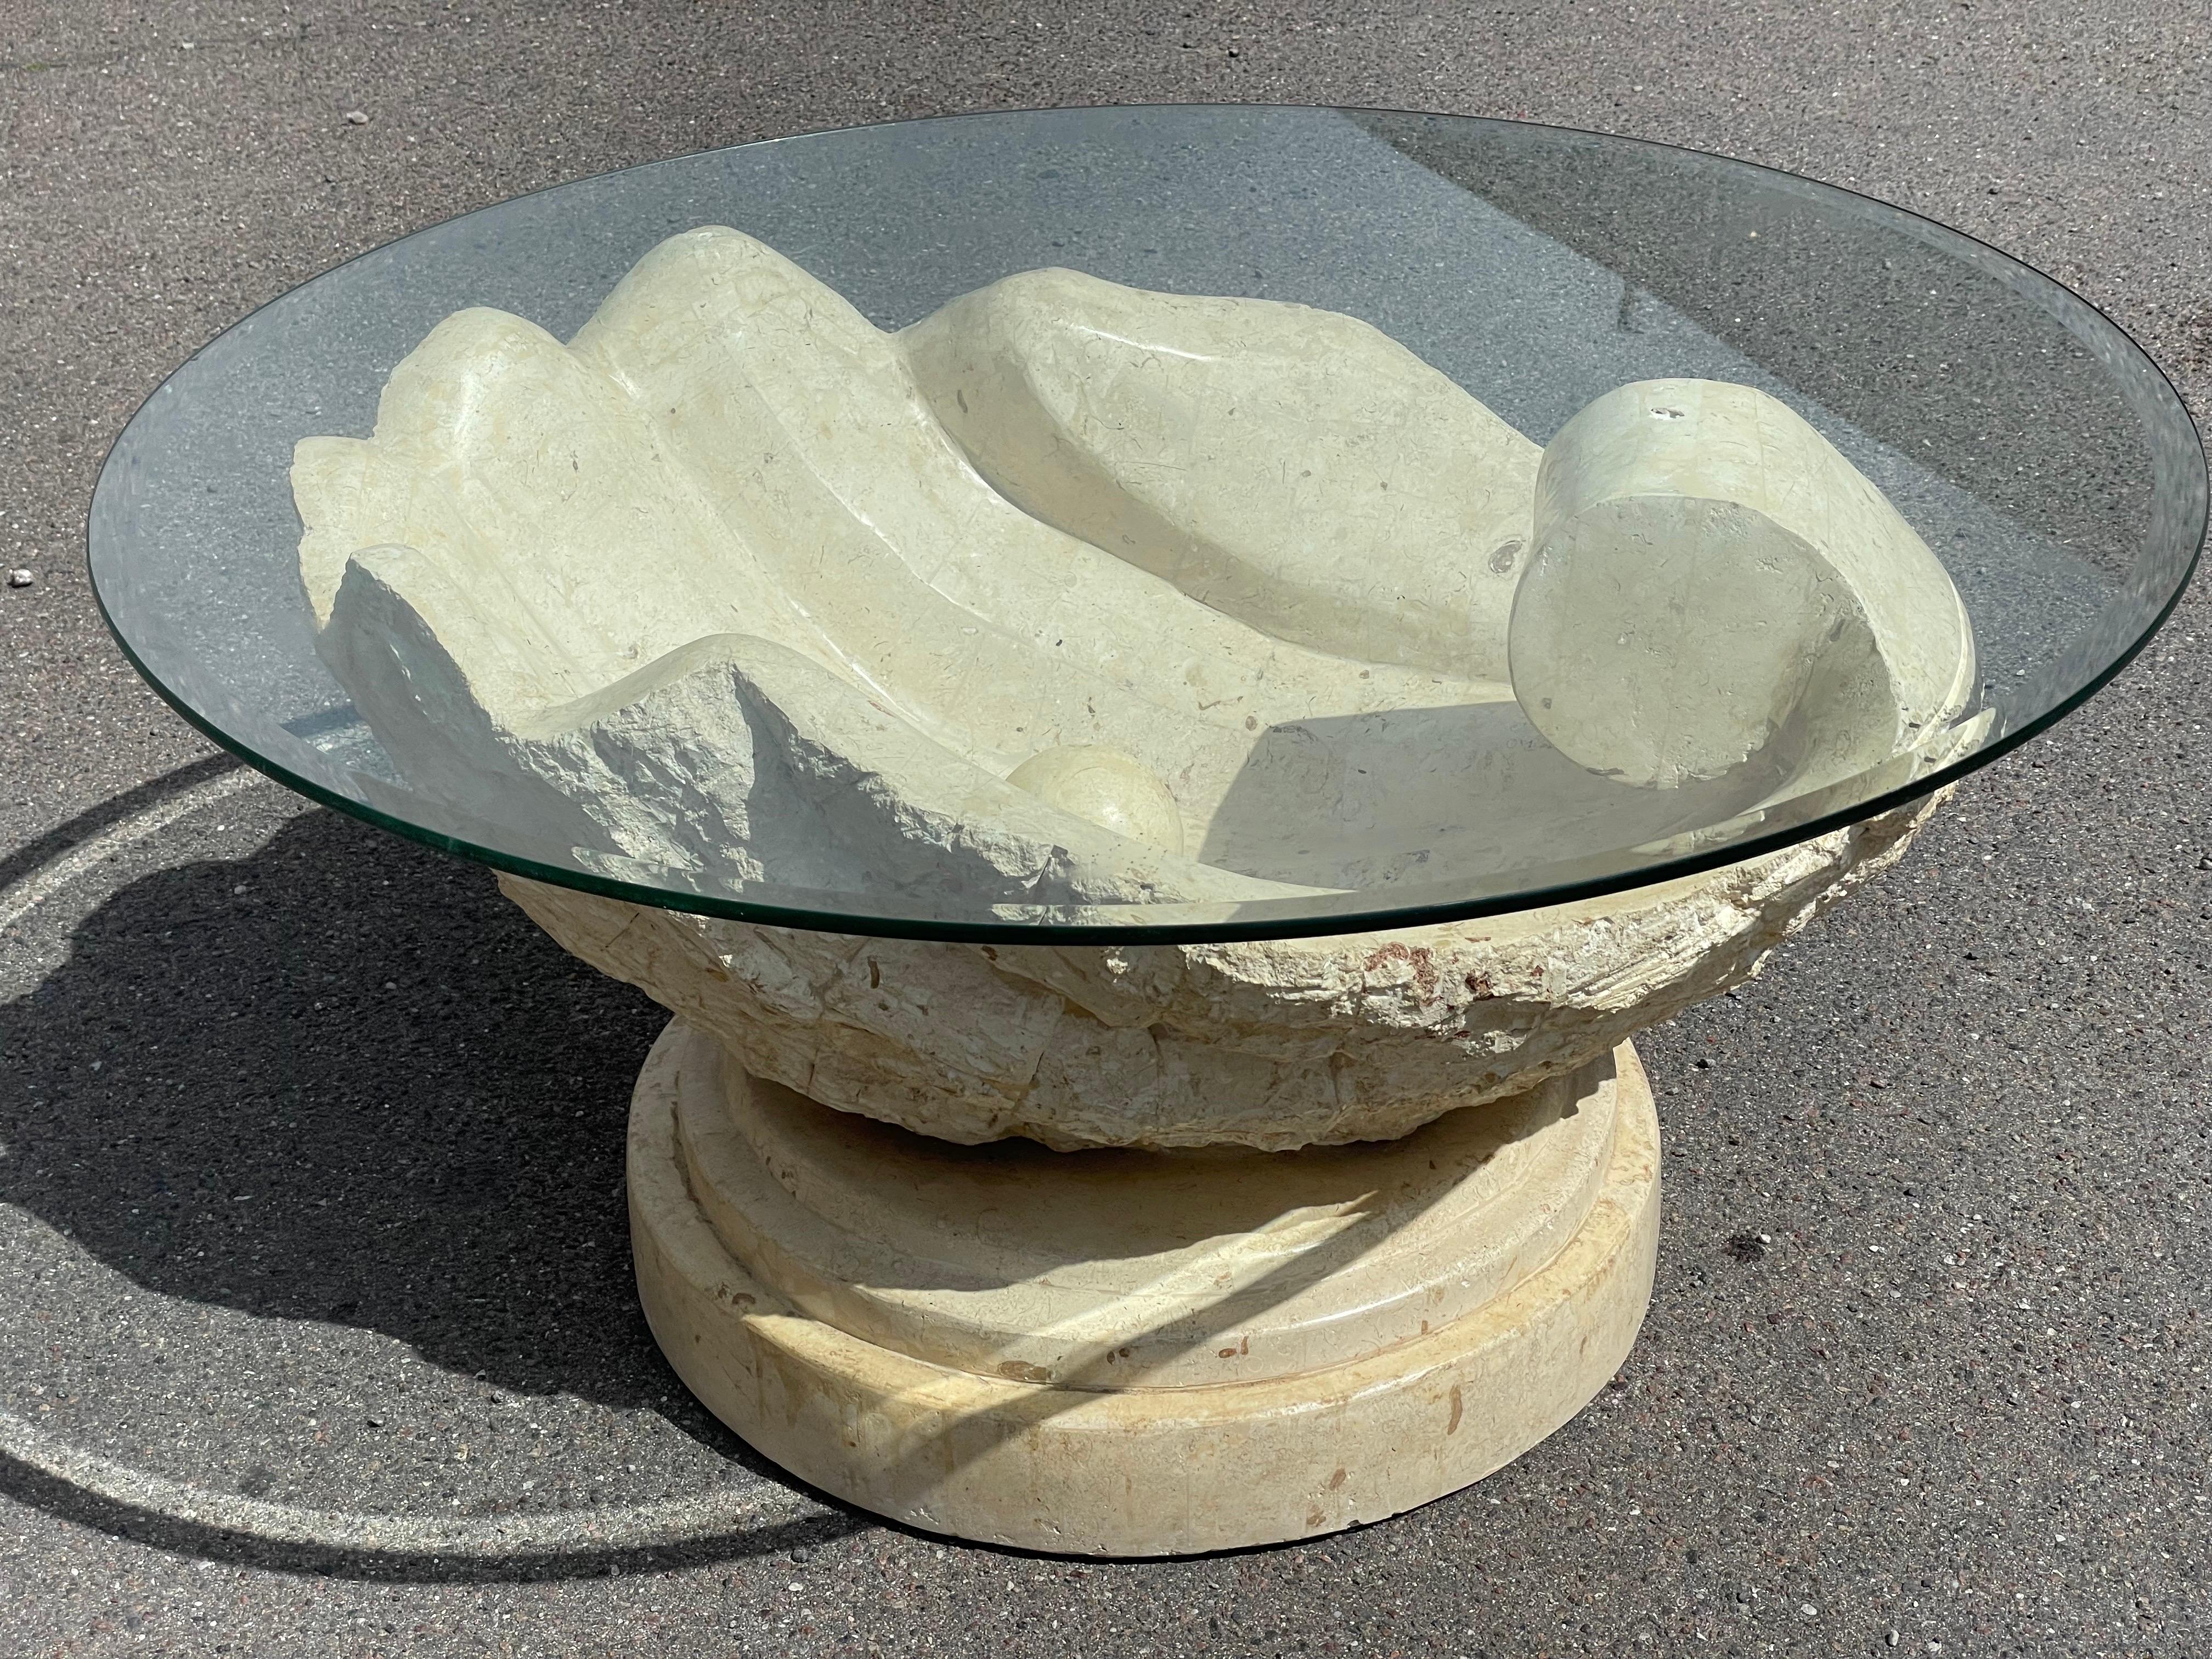 Stunning coffee table by Magnussen Ponte, 1980s from exquisite Mactan stone 1